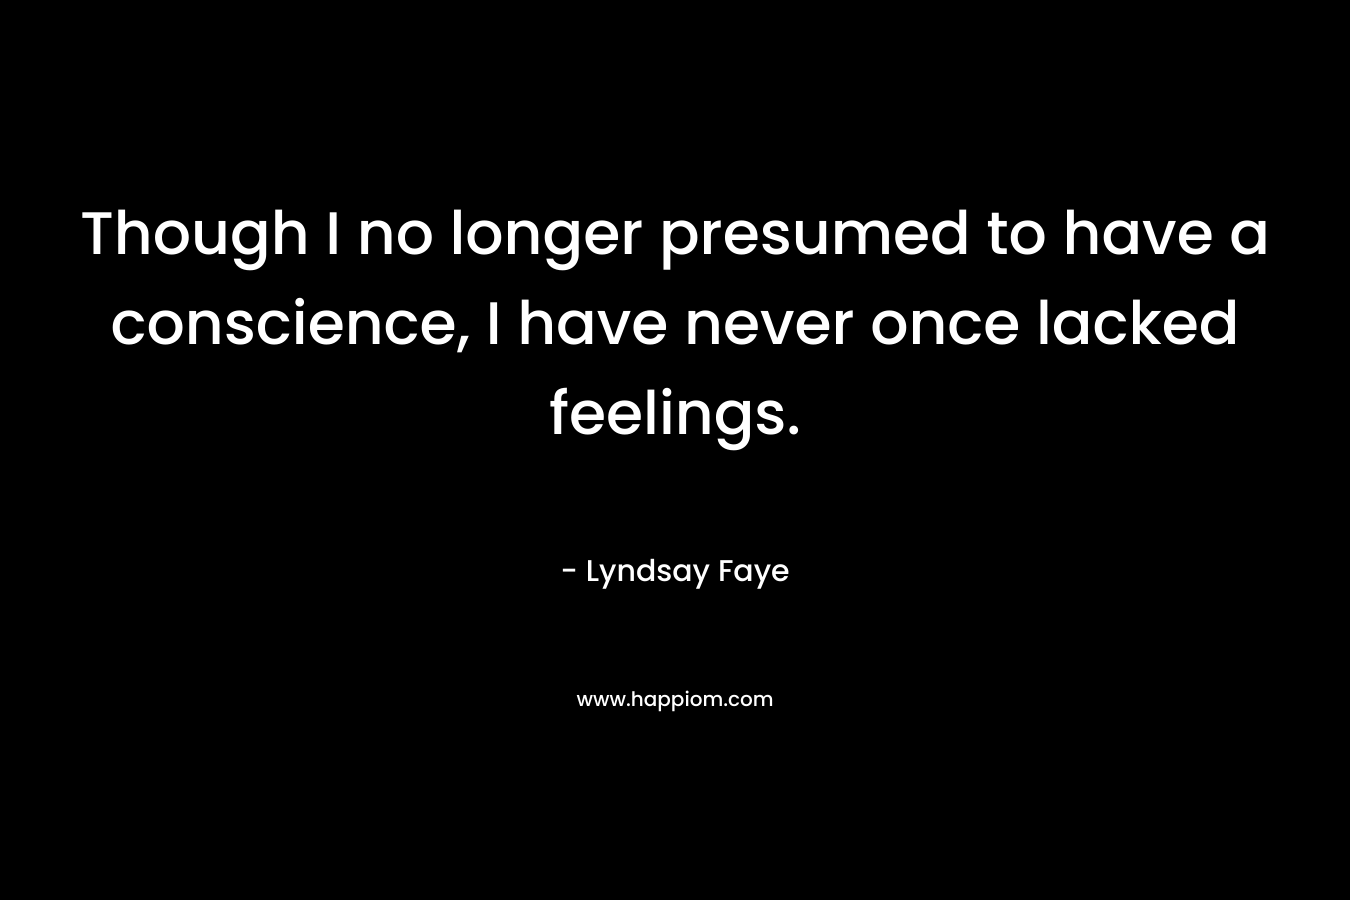 Though I no longer presumed to have a conscience, I have never once lacked feelings. – Lyndsay Faye